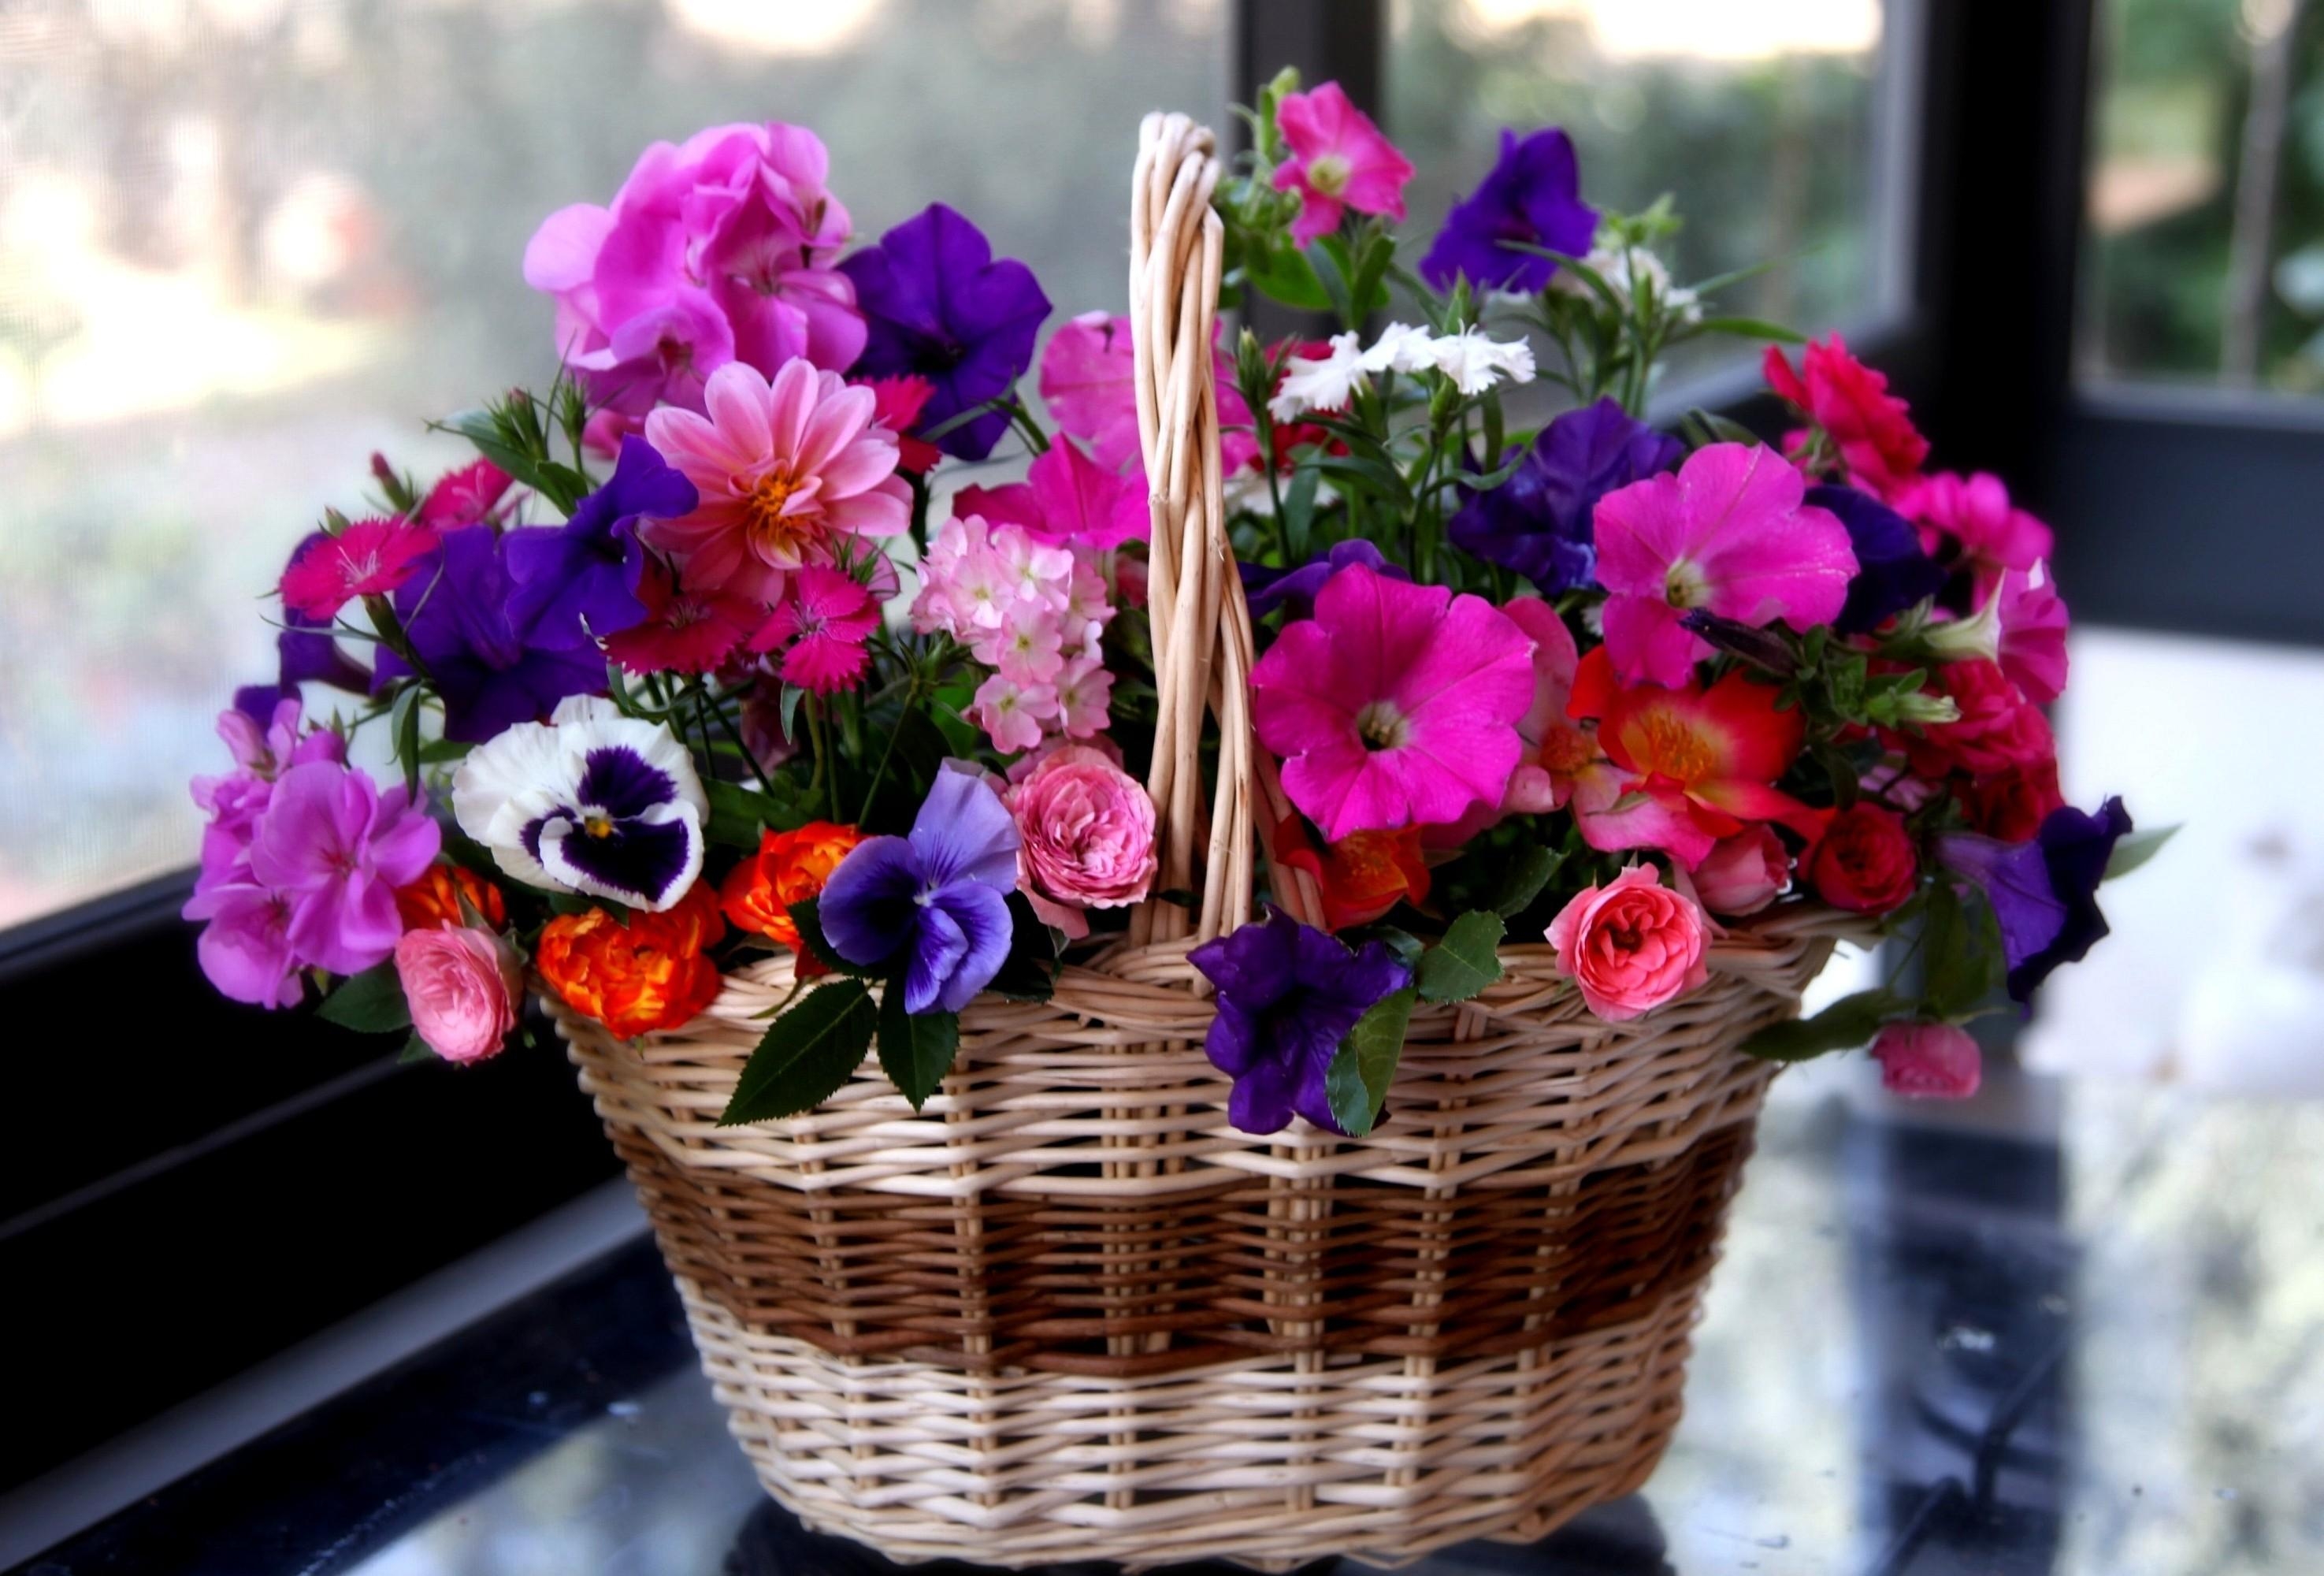 143499 download wallpaper flowers, roses, pansies, basket, different, geranium, petunia screensavers and pictures for free